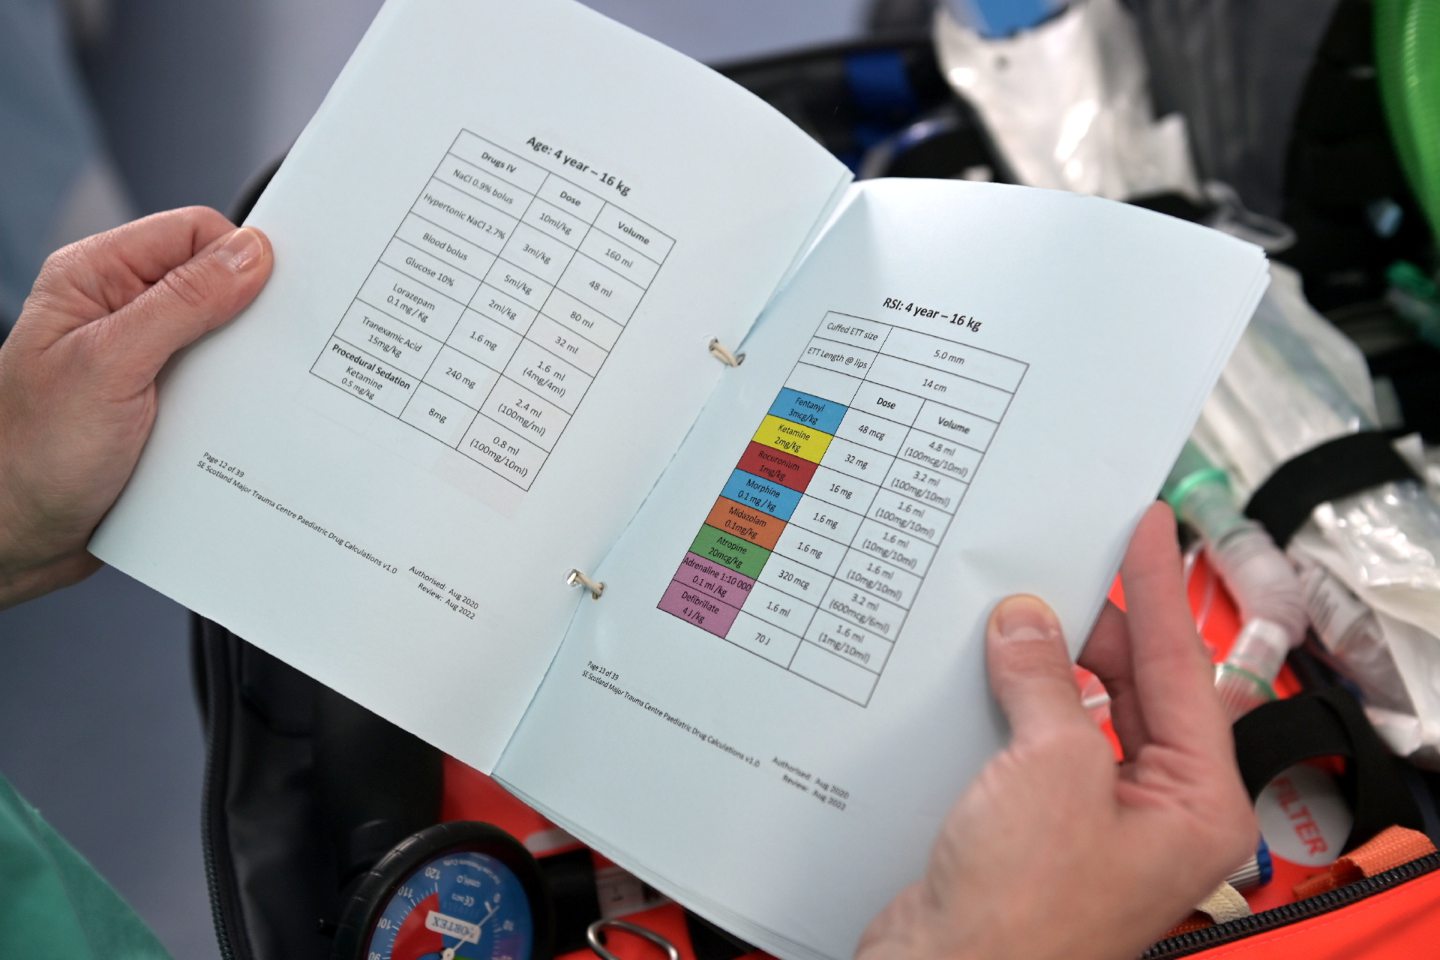 Each kit contains guidance on doses of medication. Image: Sandy McCook/ DC Thomson